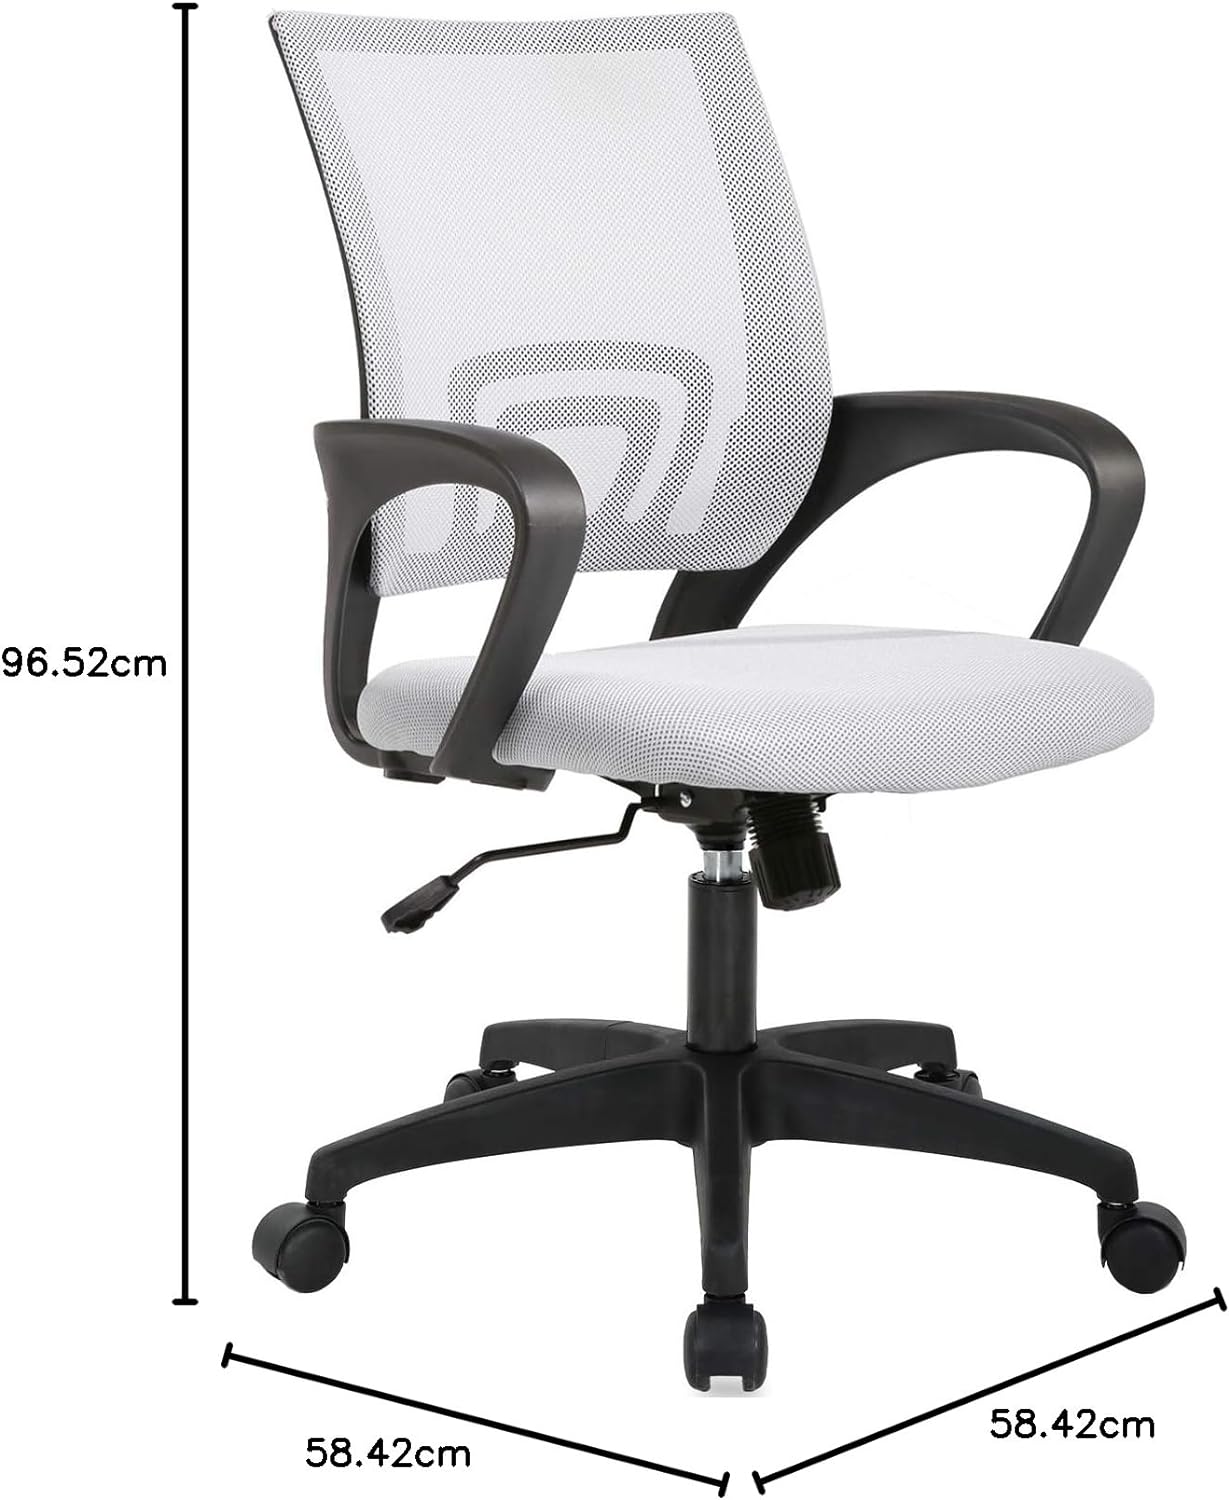 https://bigbigmart.com/wp-content/uploads/2023/12/BestOffice-Home-Office-Chair-Ergonomic-Desk-Chair-Mesh-Computer-Chair-with-Lumbar-Support-Armrest-Executive-Rolling-Swivel-Adjustable-Mid-Back-Task-Chair-for-Women-Adults-White7.jpg